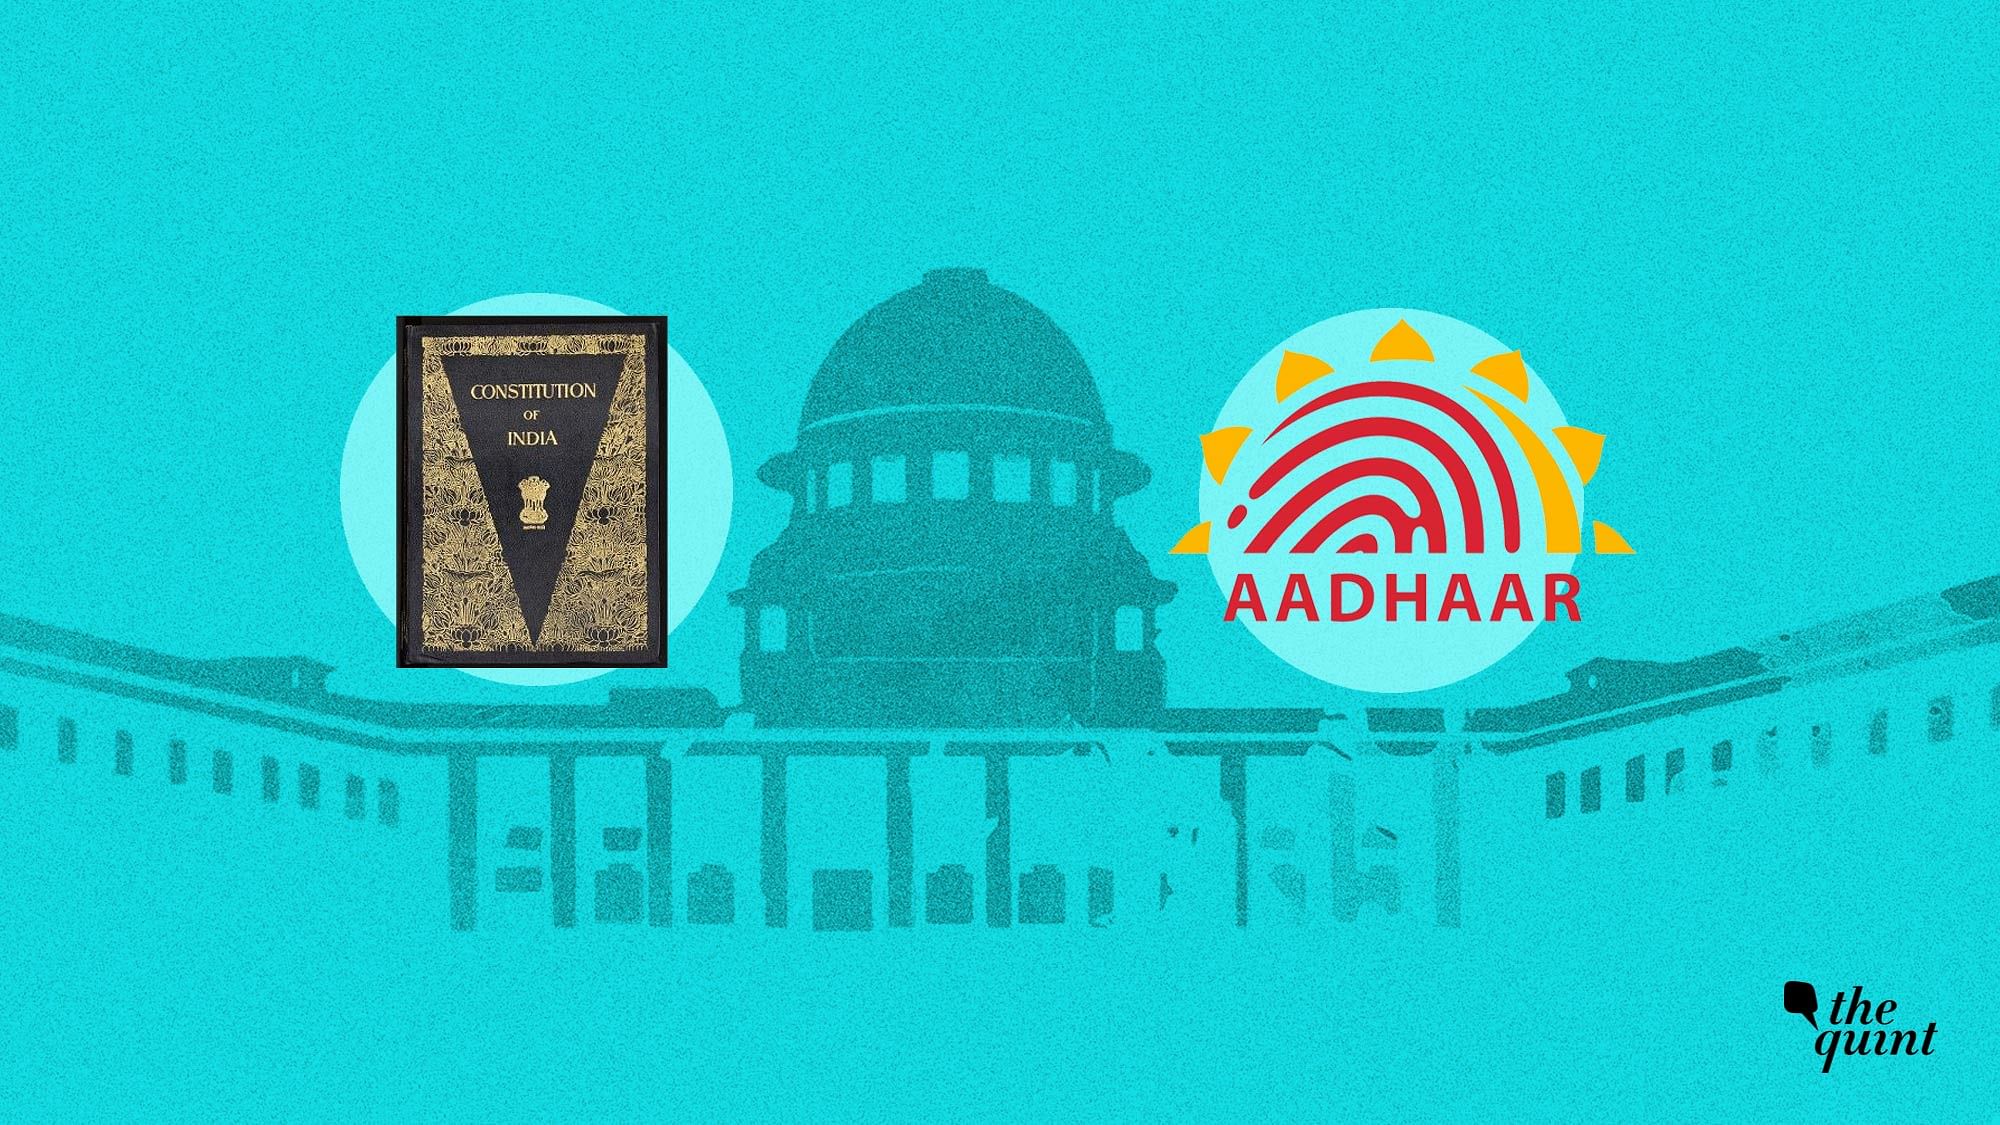 Despite the Supreme Court reading down Section 57 as unconstitutional, there persists confusion and fuzziness about the section that allowed private entities to use Aadhaar authentication.